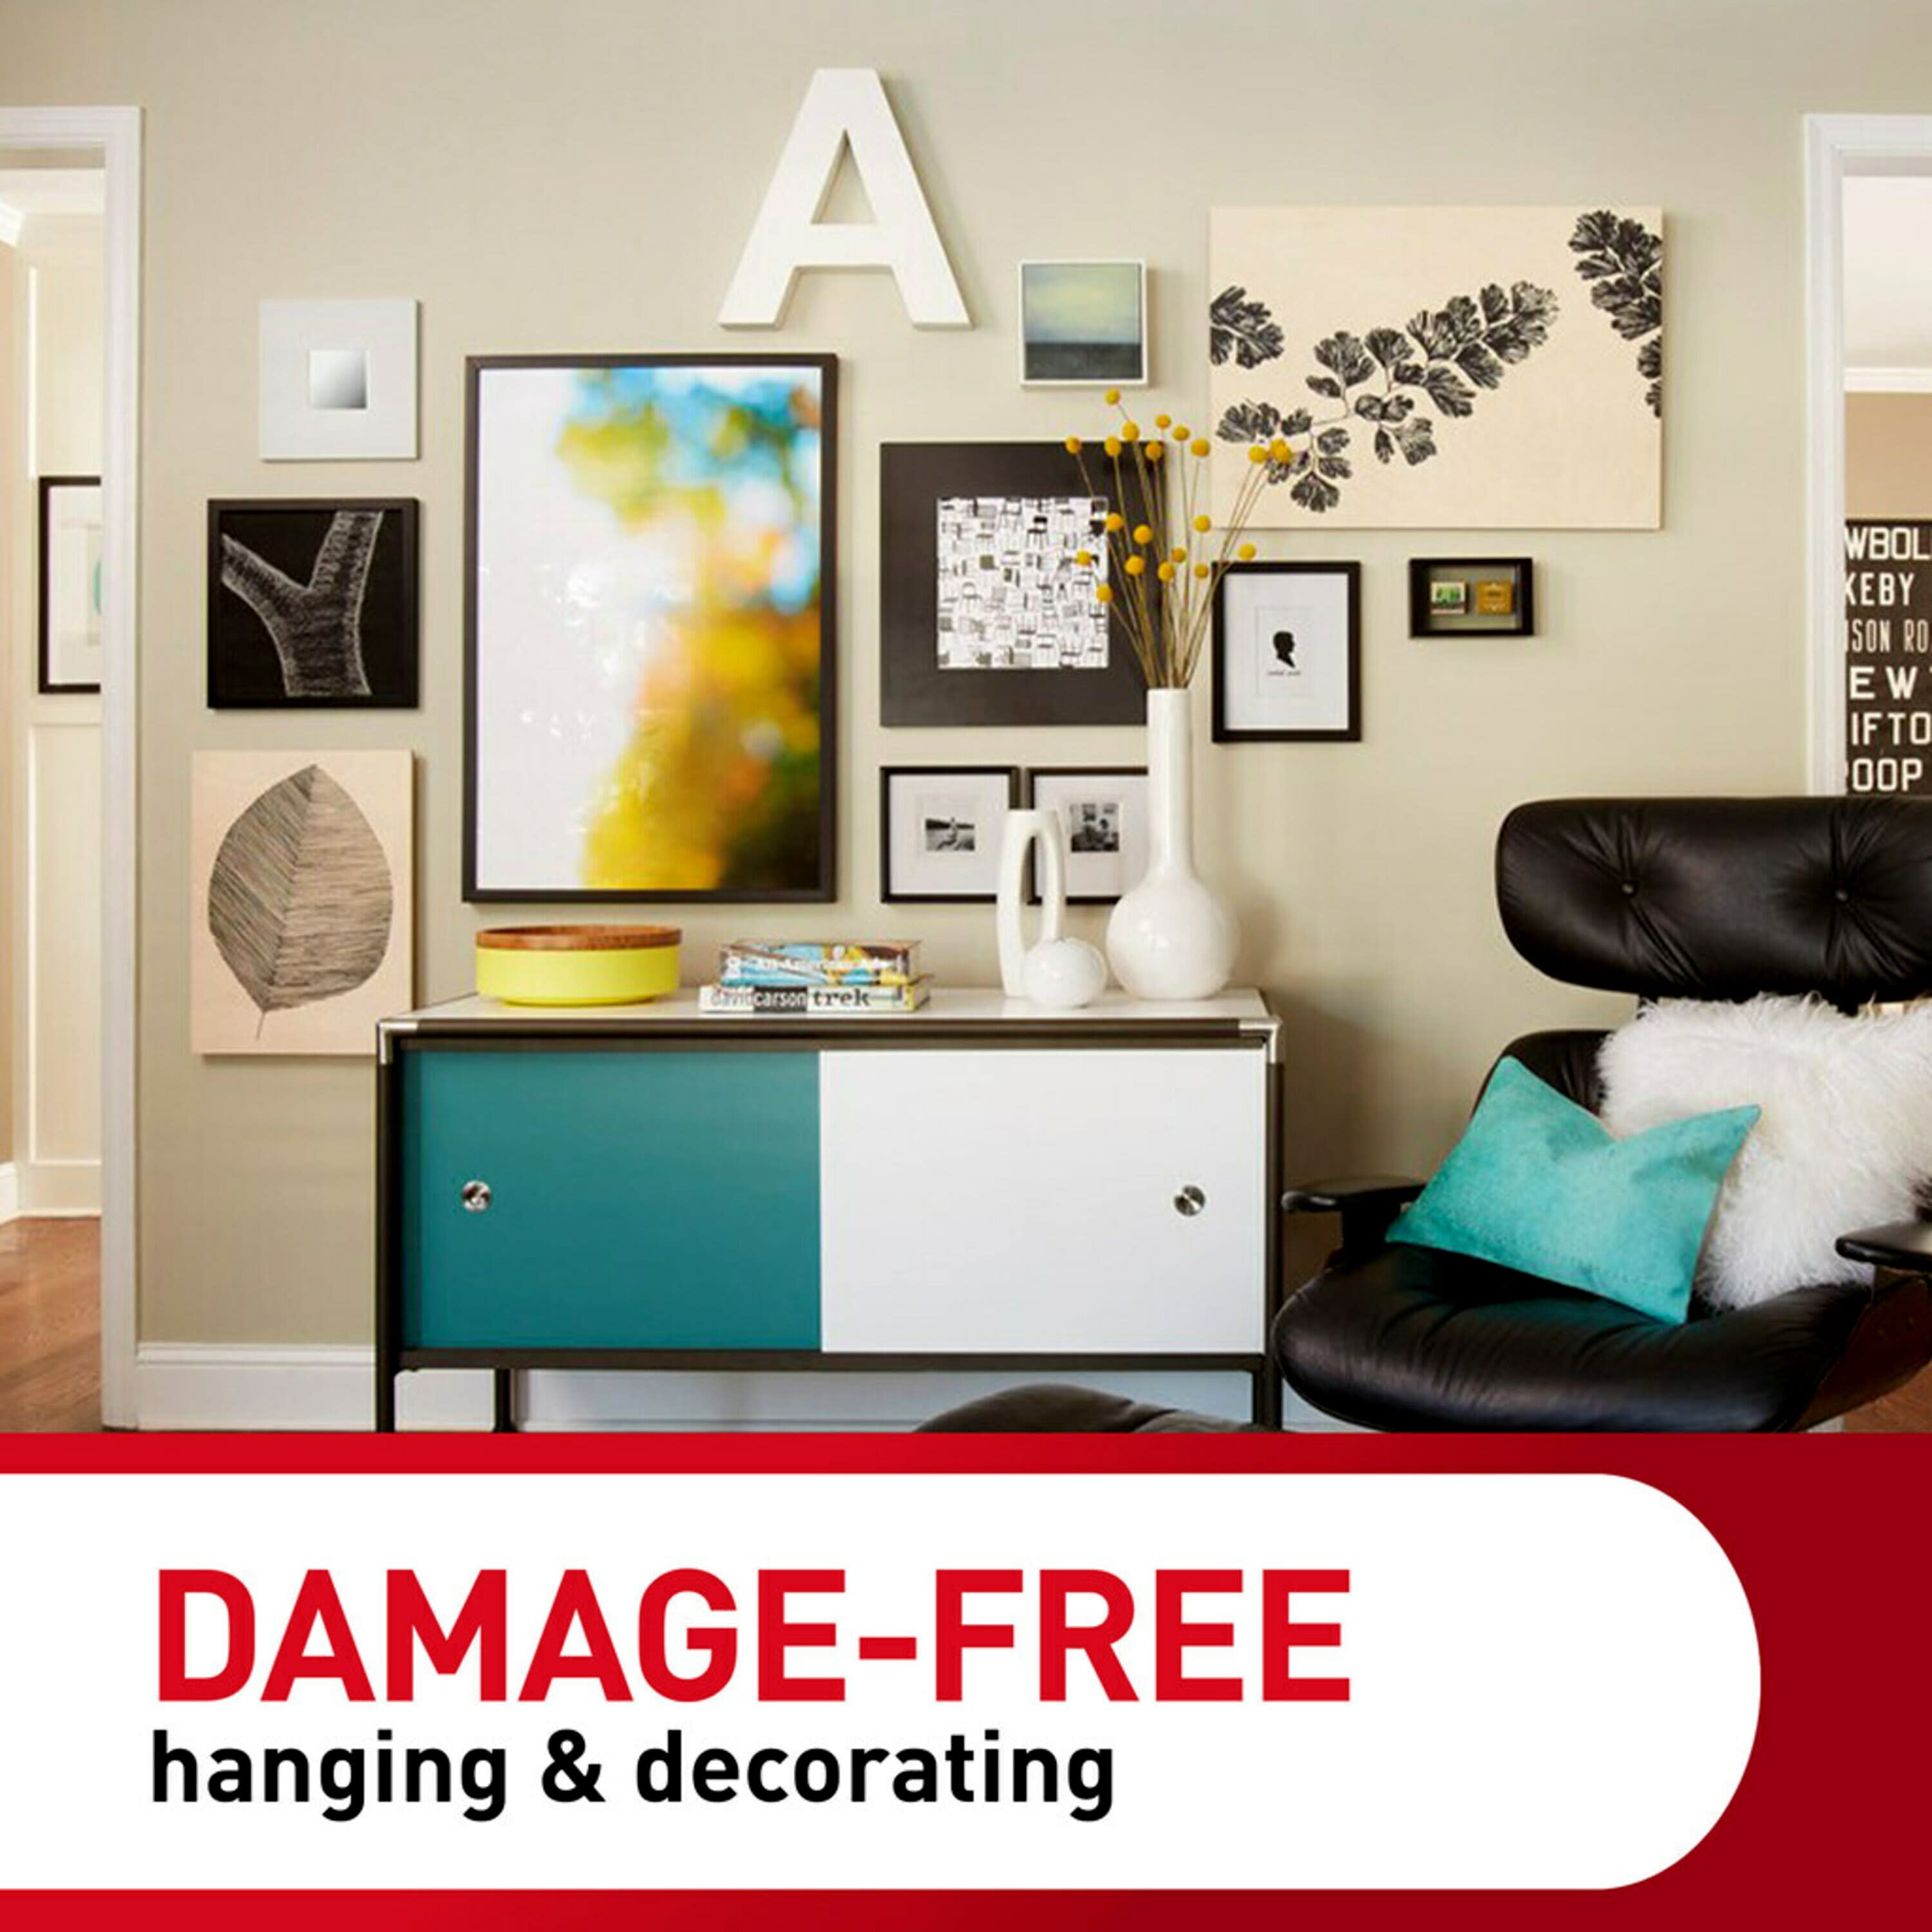 Command Large Picture Hangers, Black, Damage-Free Hanging, 12 Pairs